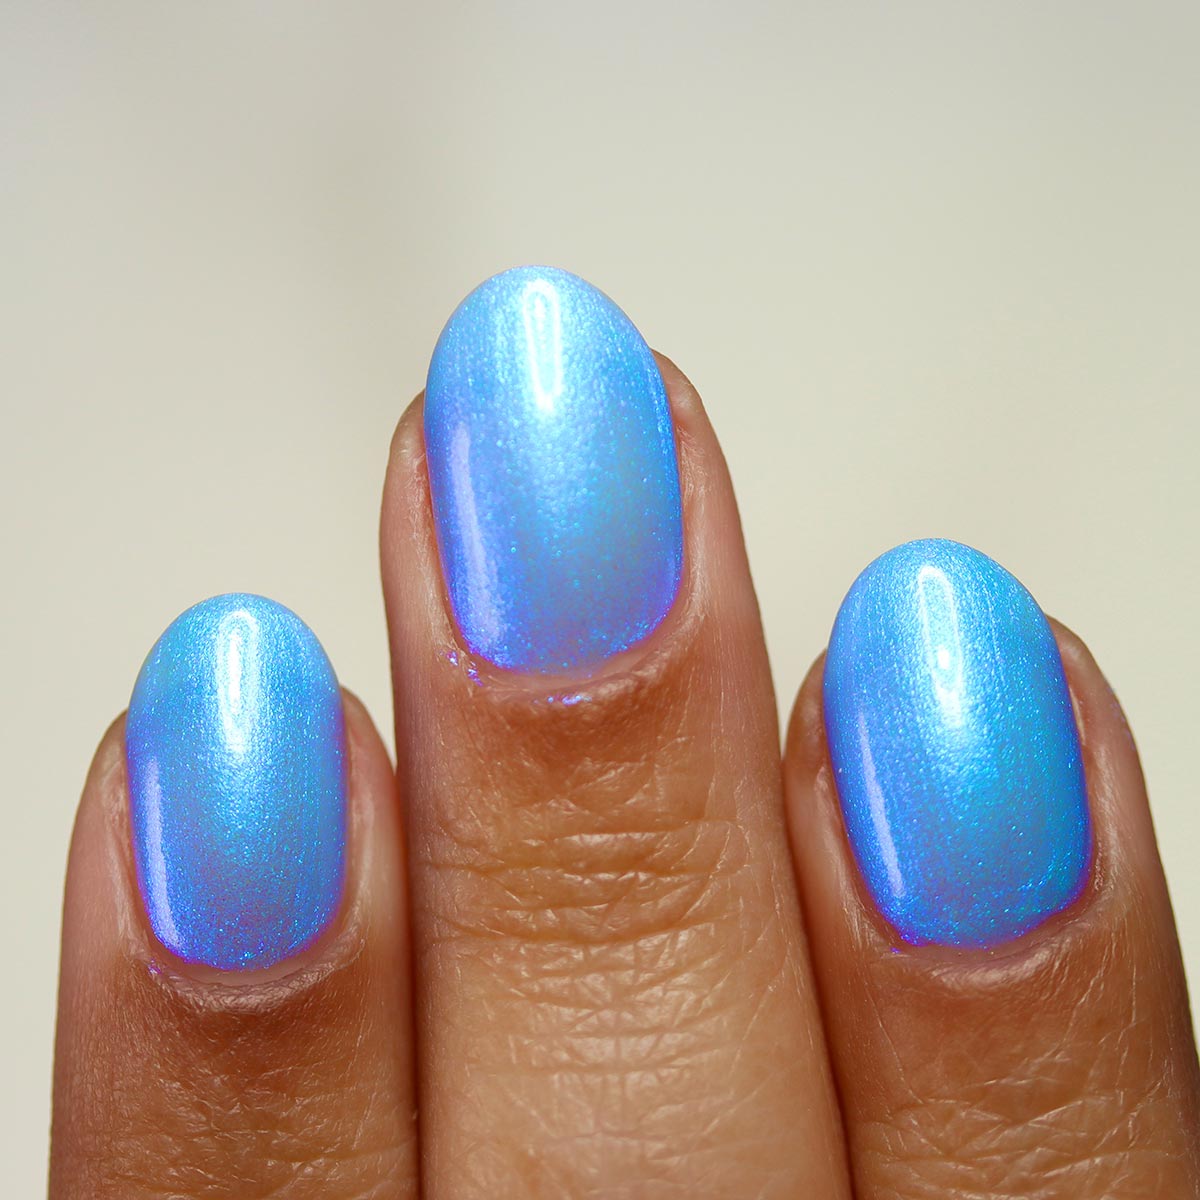 5 Blue Nail Polishes to Try for Summer